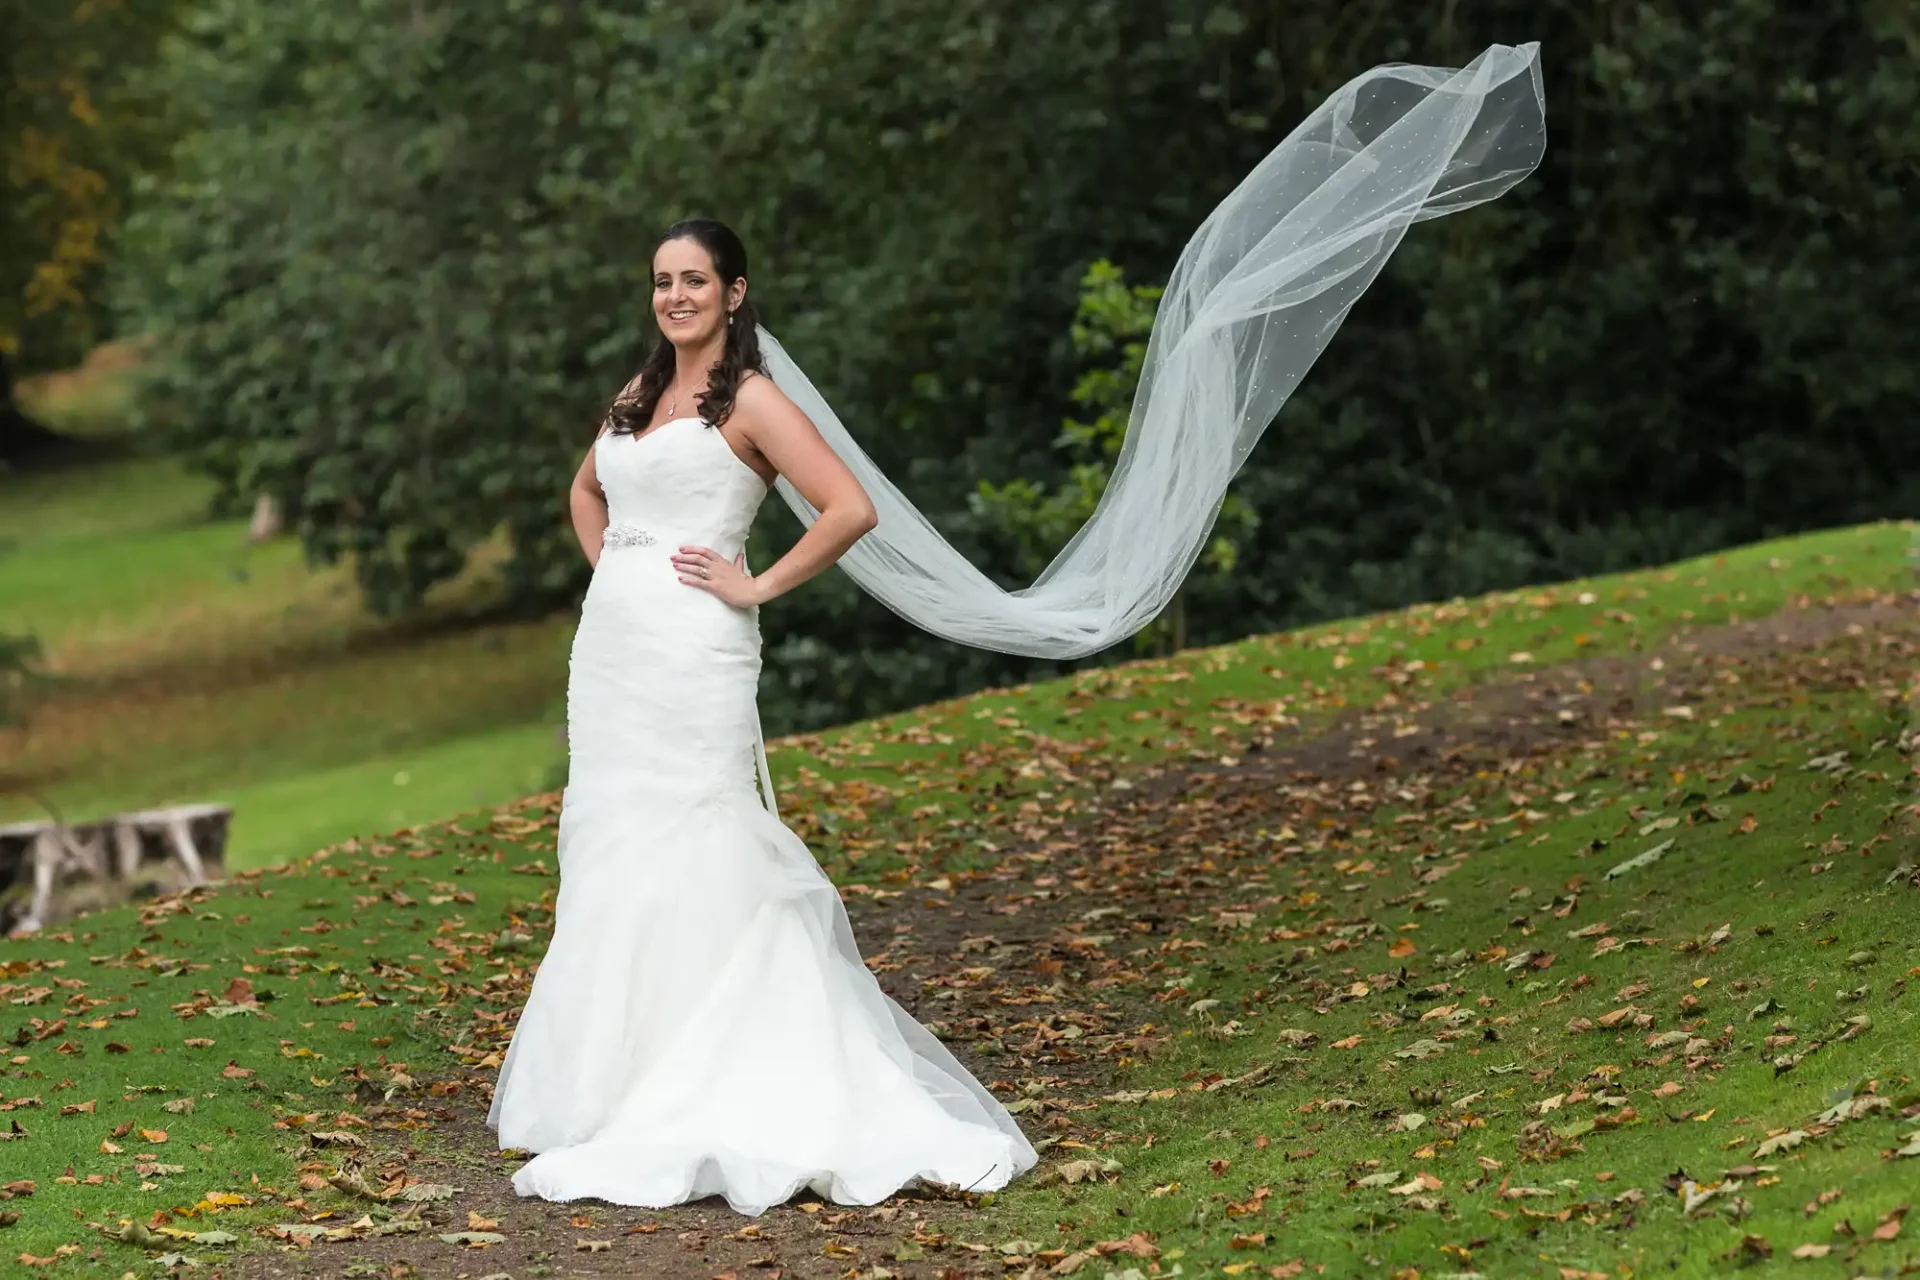 A bride in a strapless white gown smiles broadly, standing on a grassy slope with her long veil flowing elegantly in the breeze.